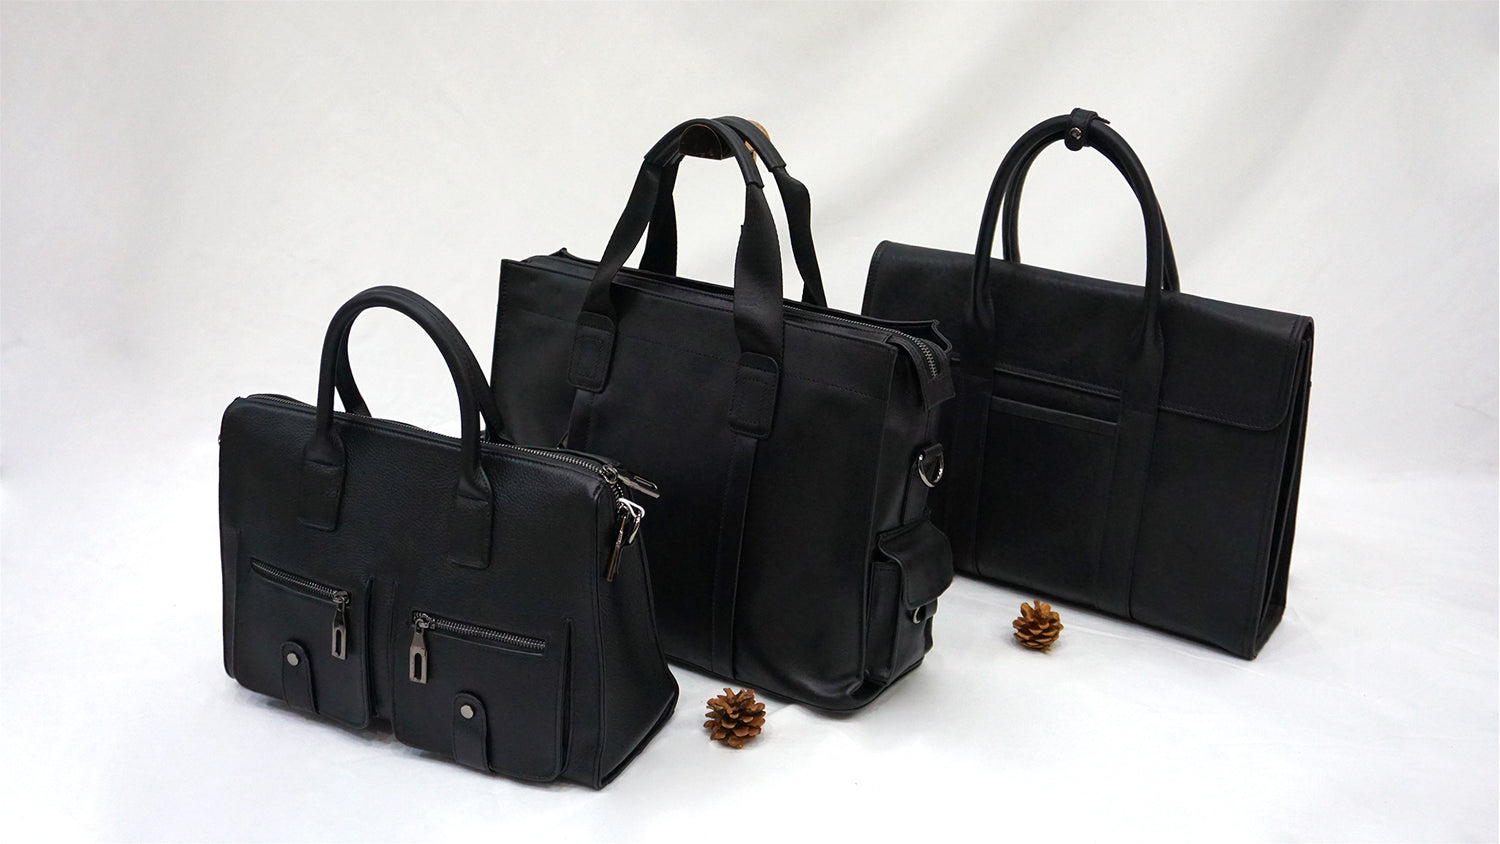 Women's leather briefcases by Tomorrow Closet (Singapore)